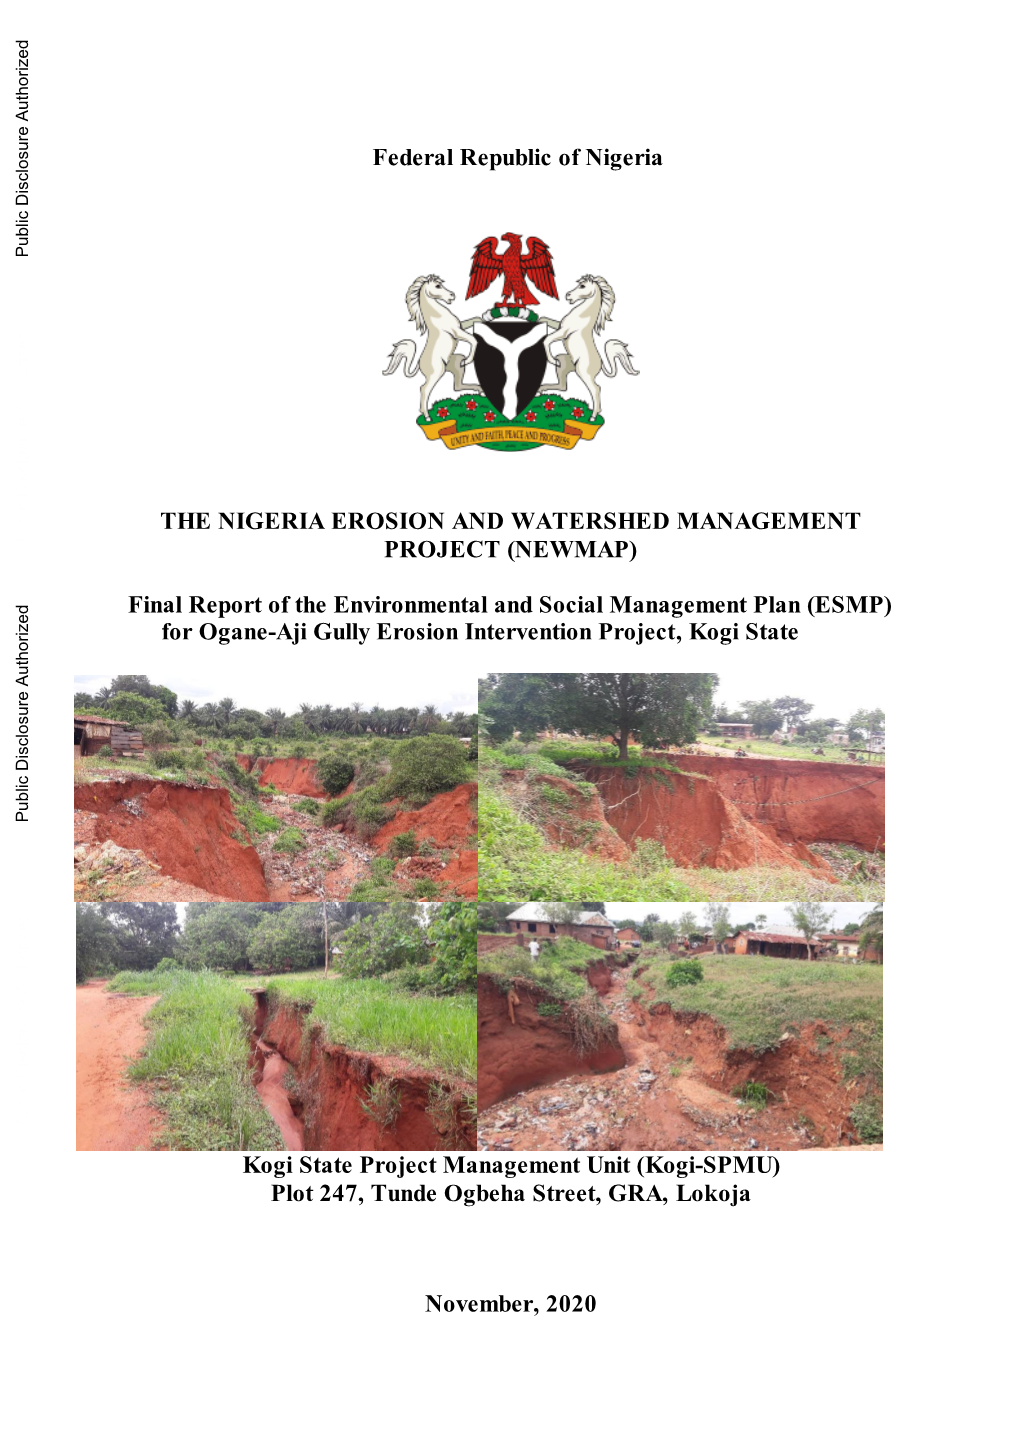 Final-Environmental-And-Social-Management-Plan-For-Ogane-Aji-Gully-Erosion